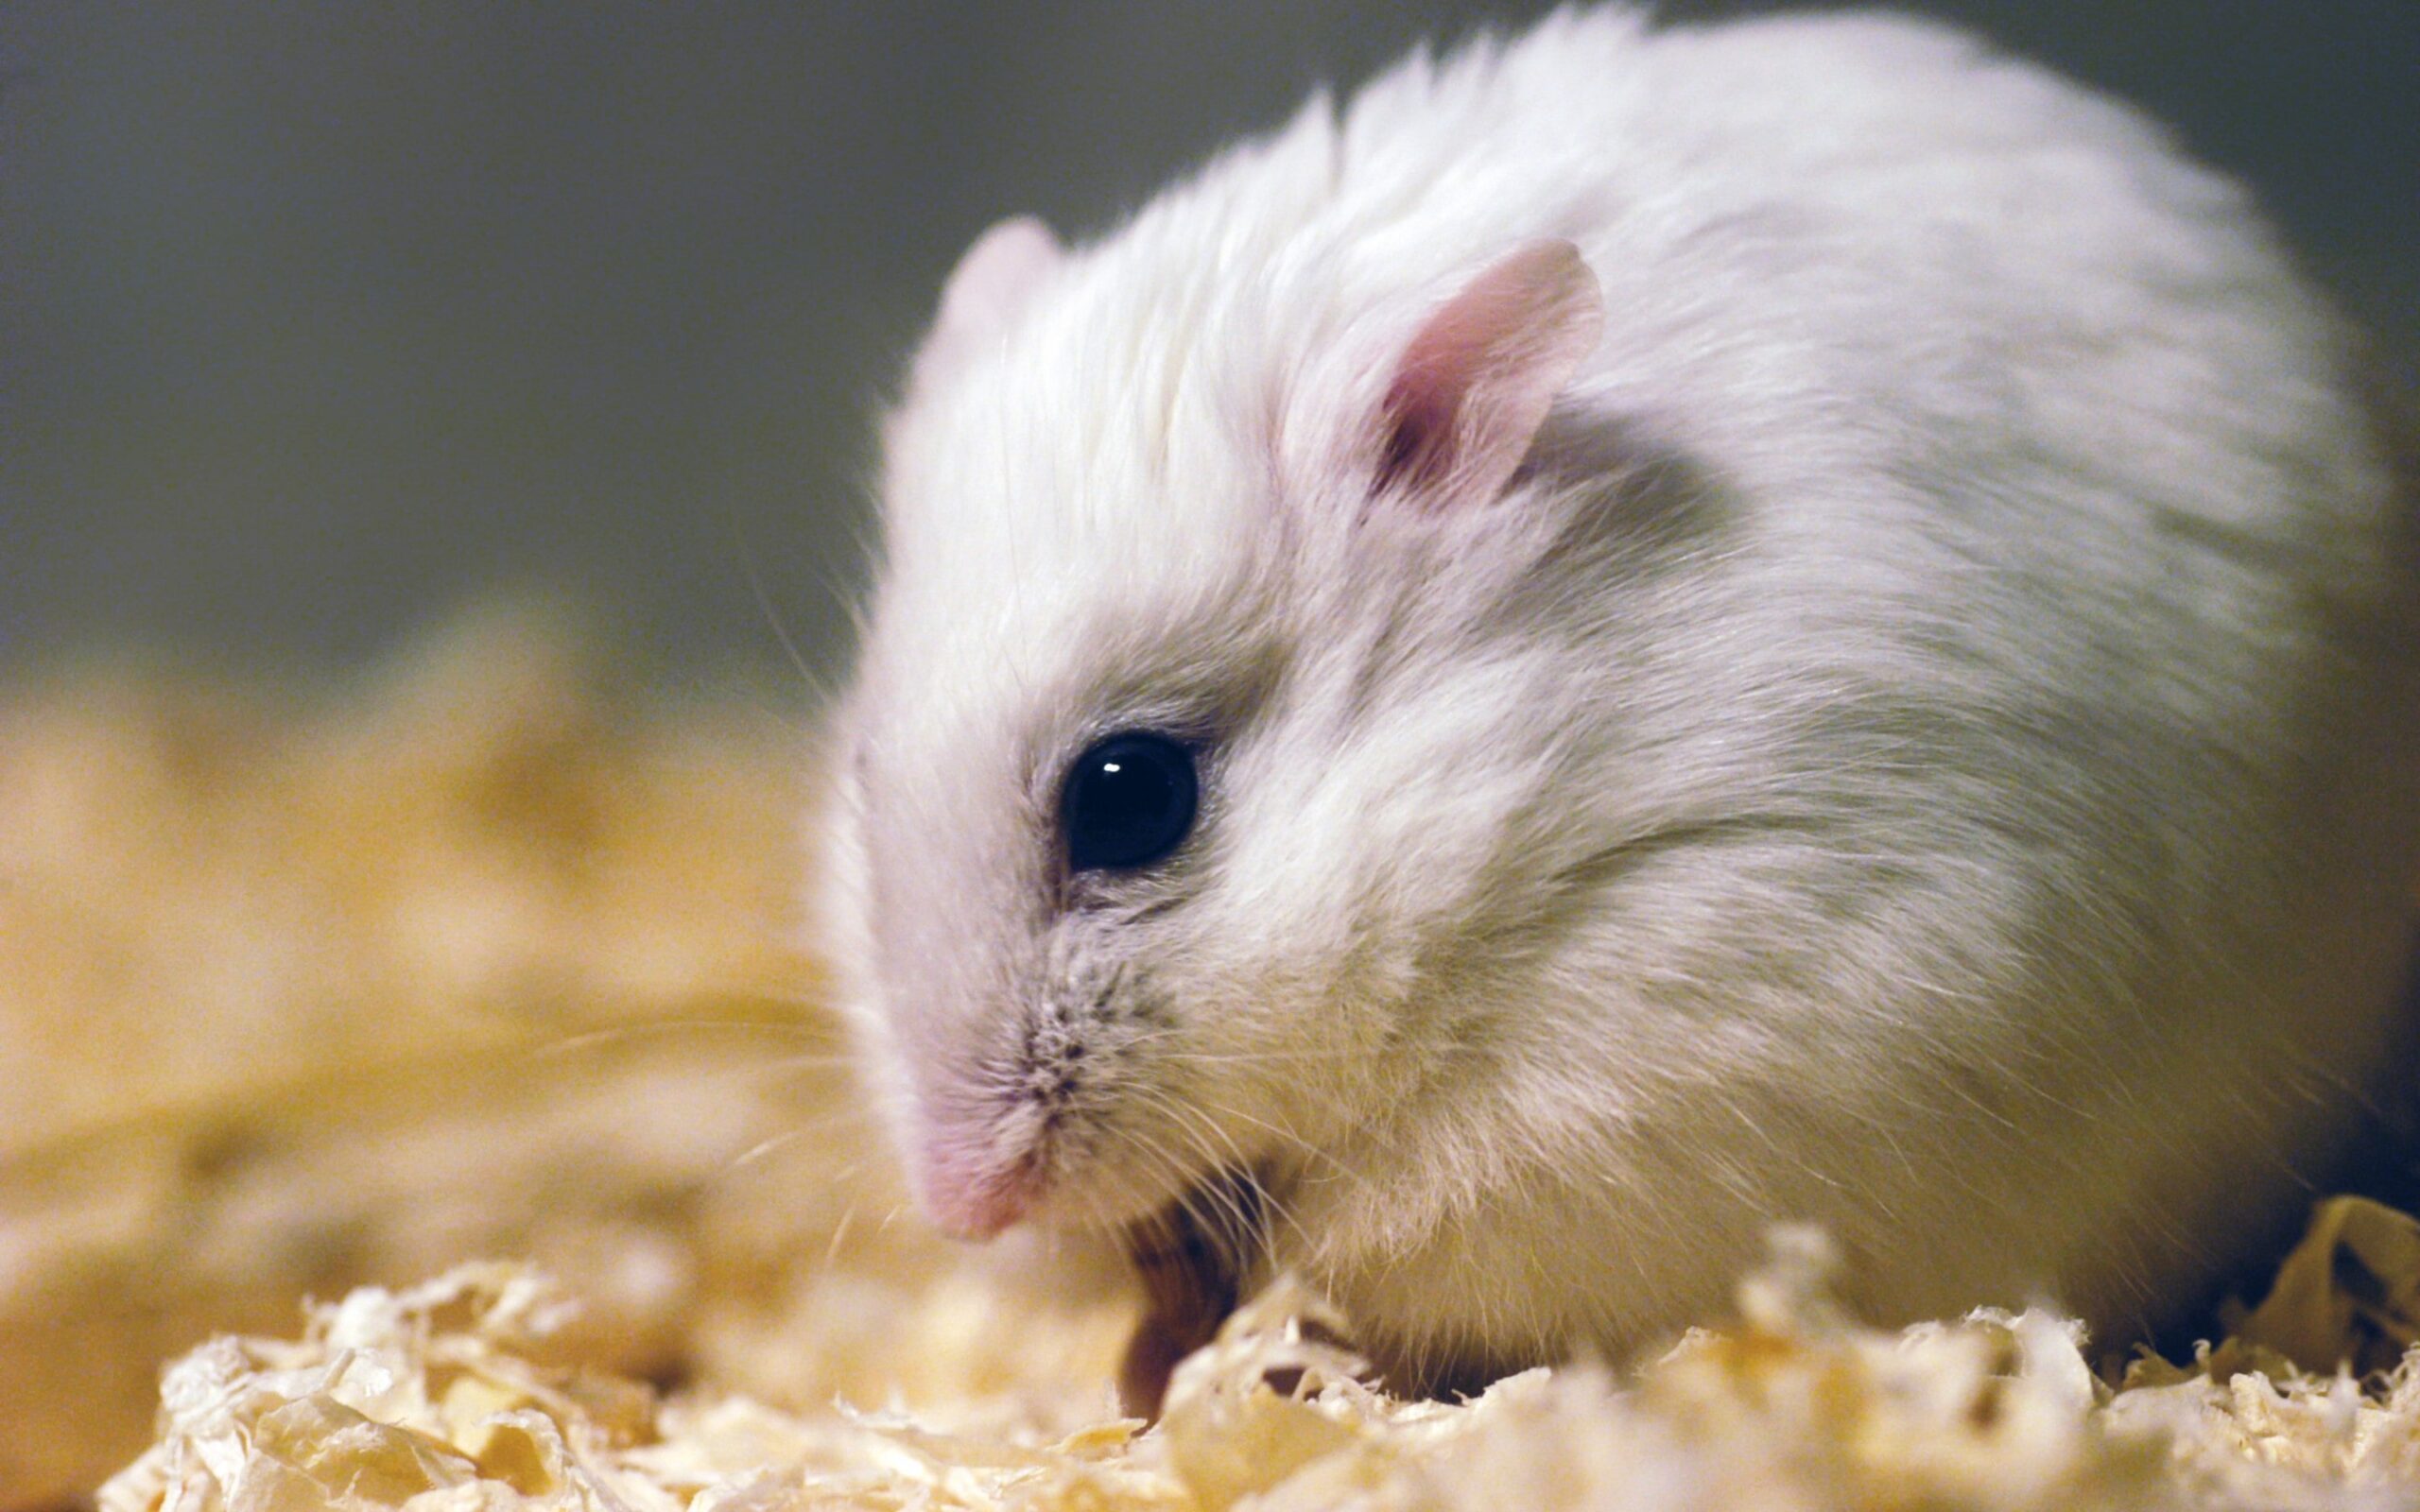 A relaxed white hamster with a rounded back.